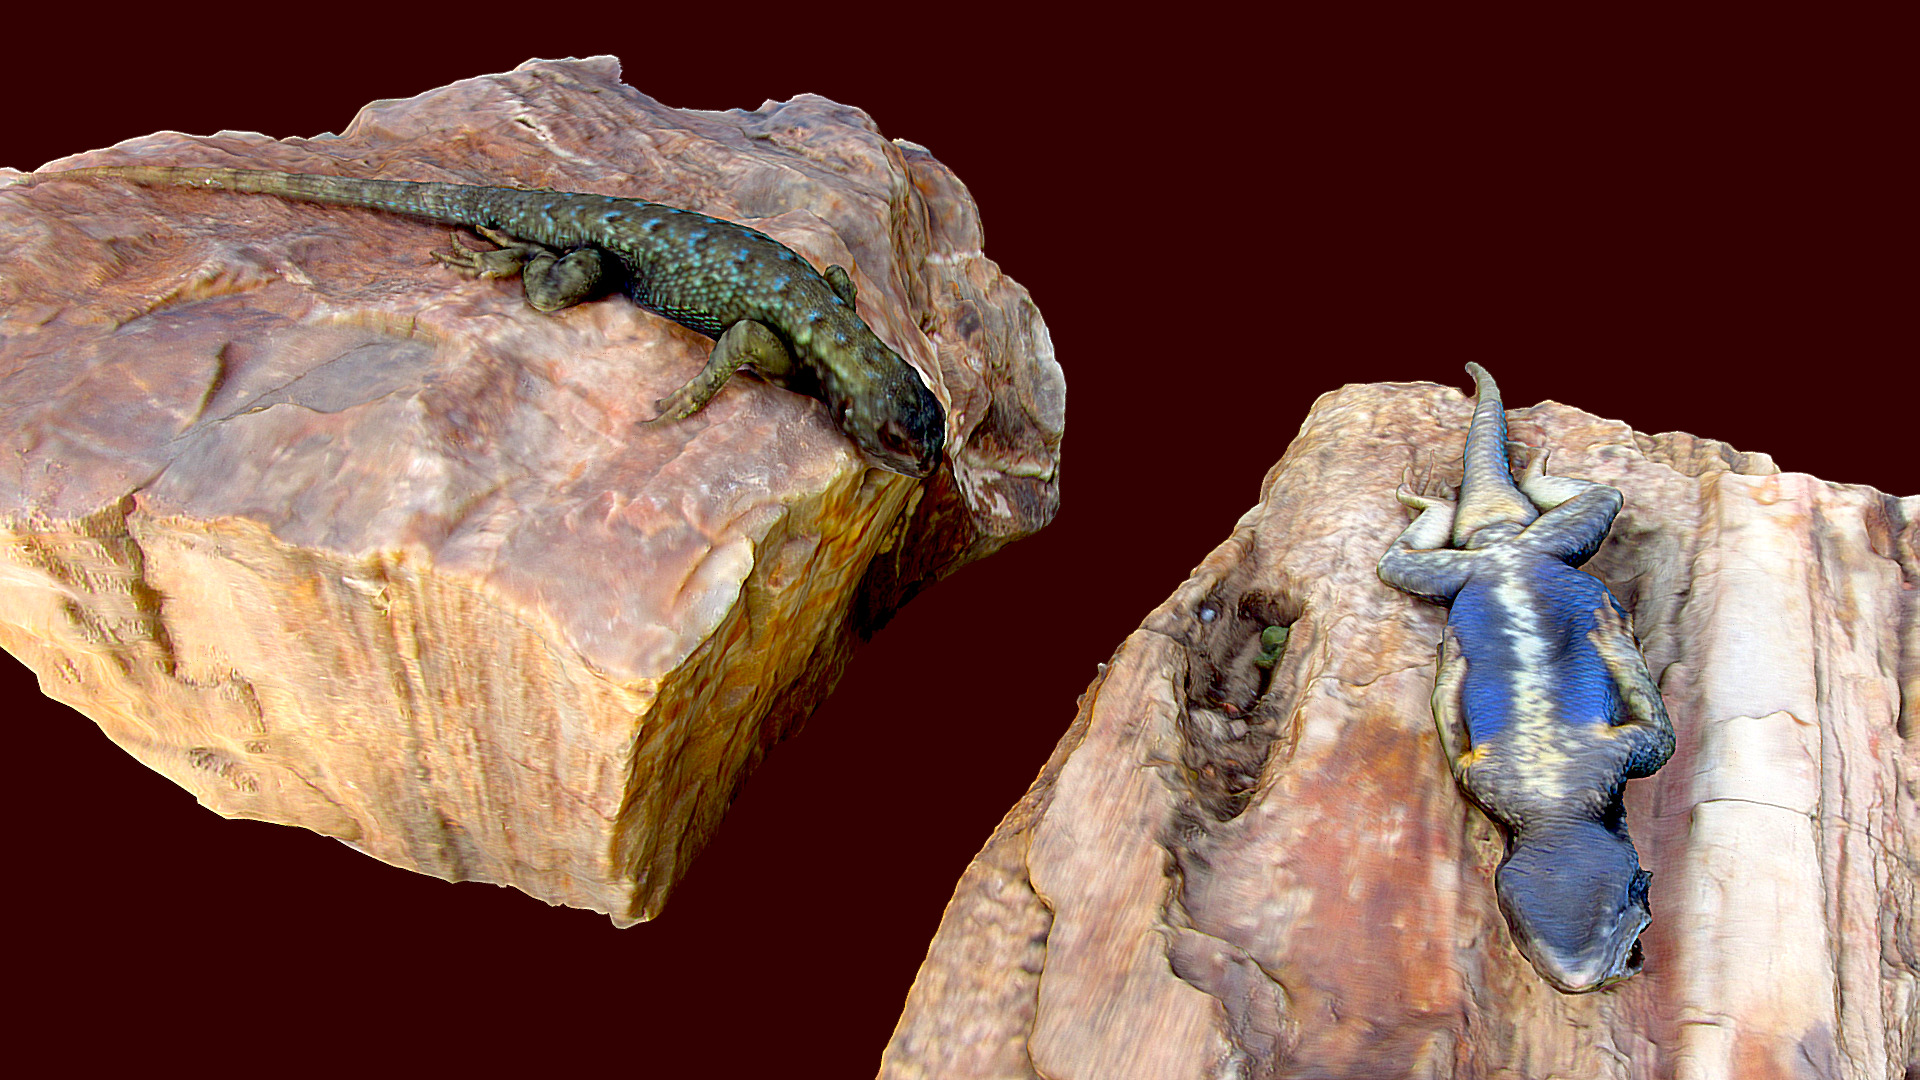 3D model Blue Belly Lizards - This is a 3D model of the Blue Belly Lizards. The 3D model is about a lizard on a log.